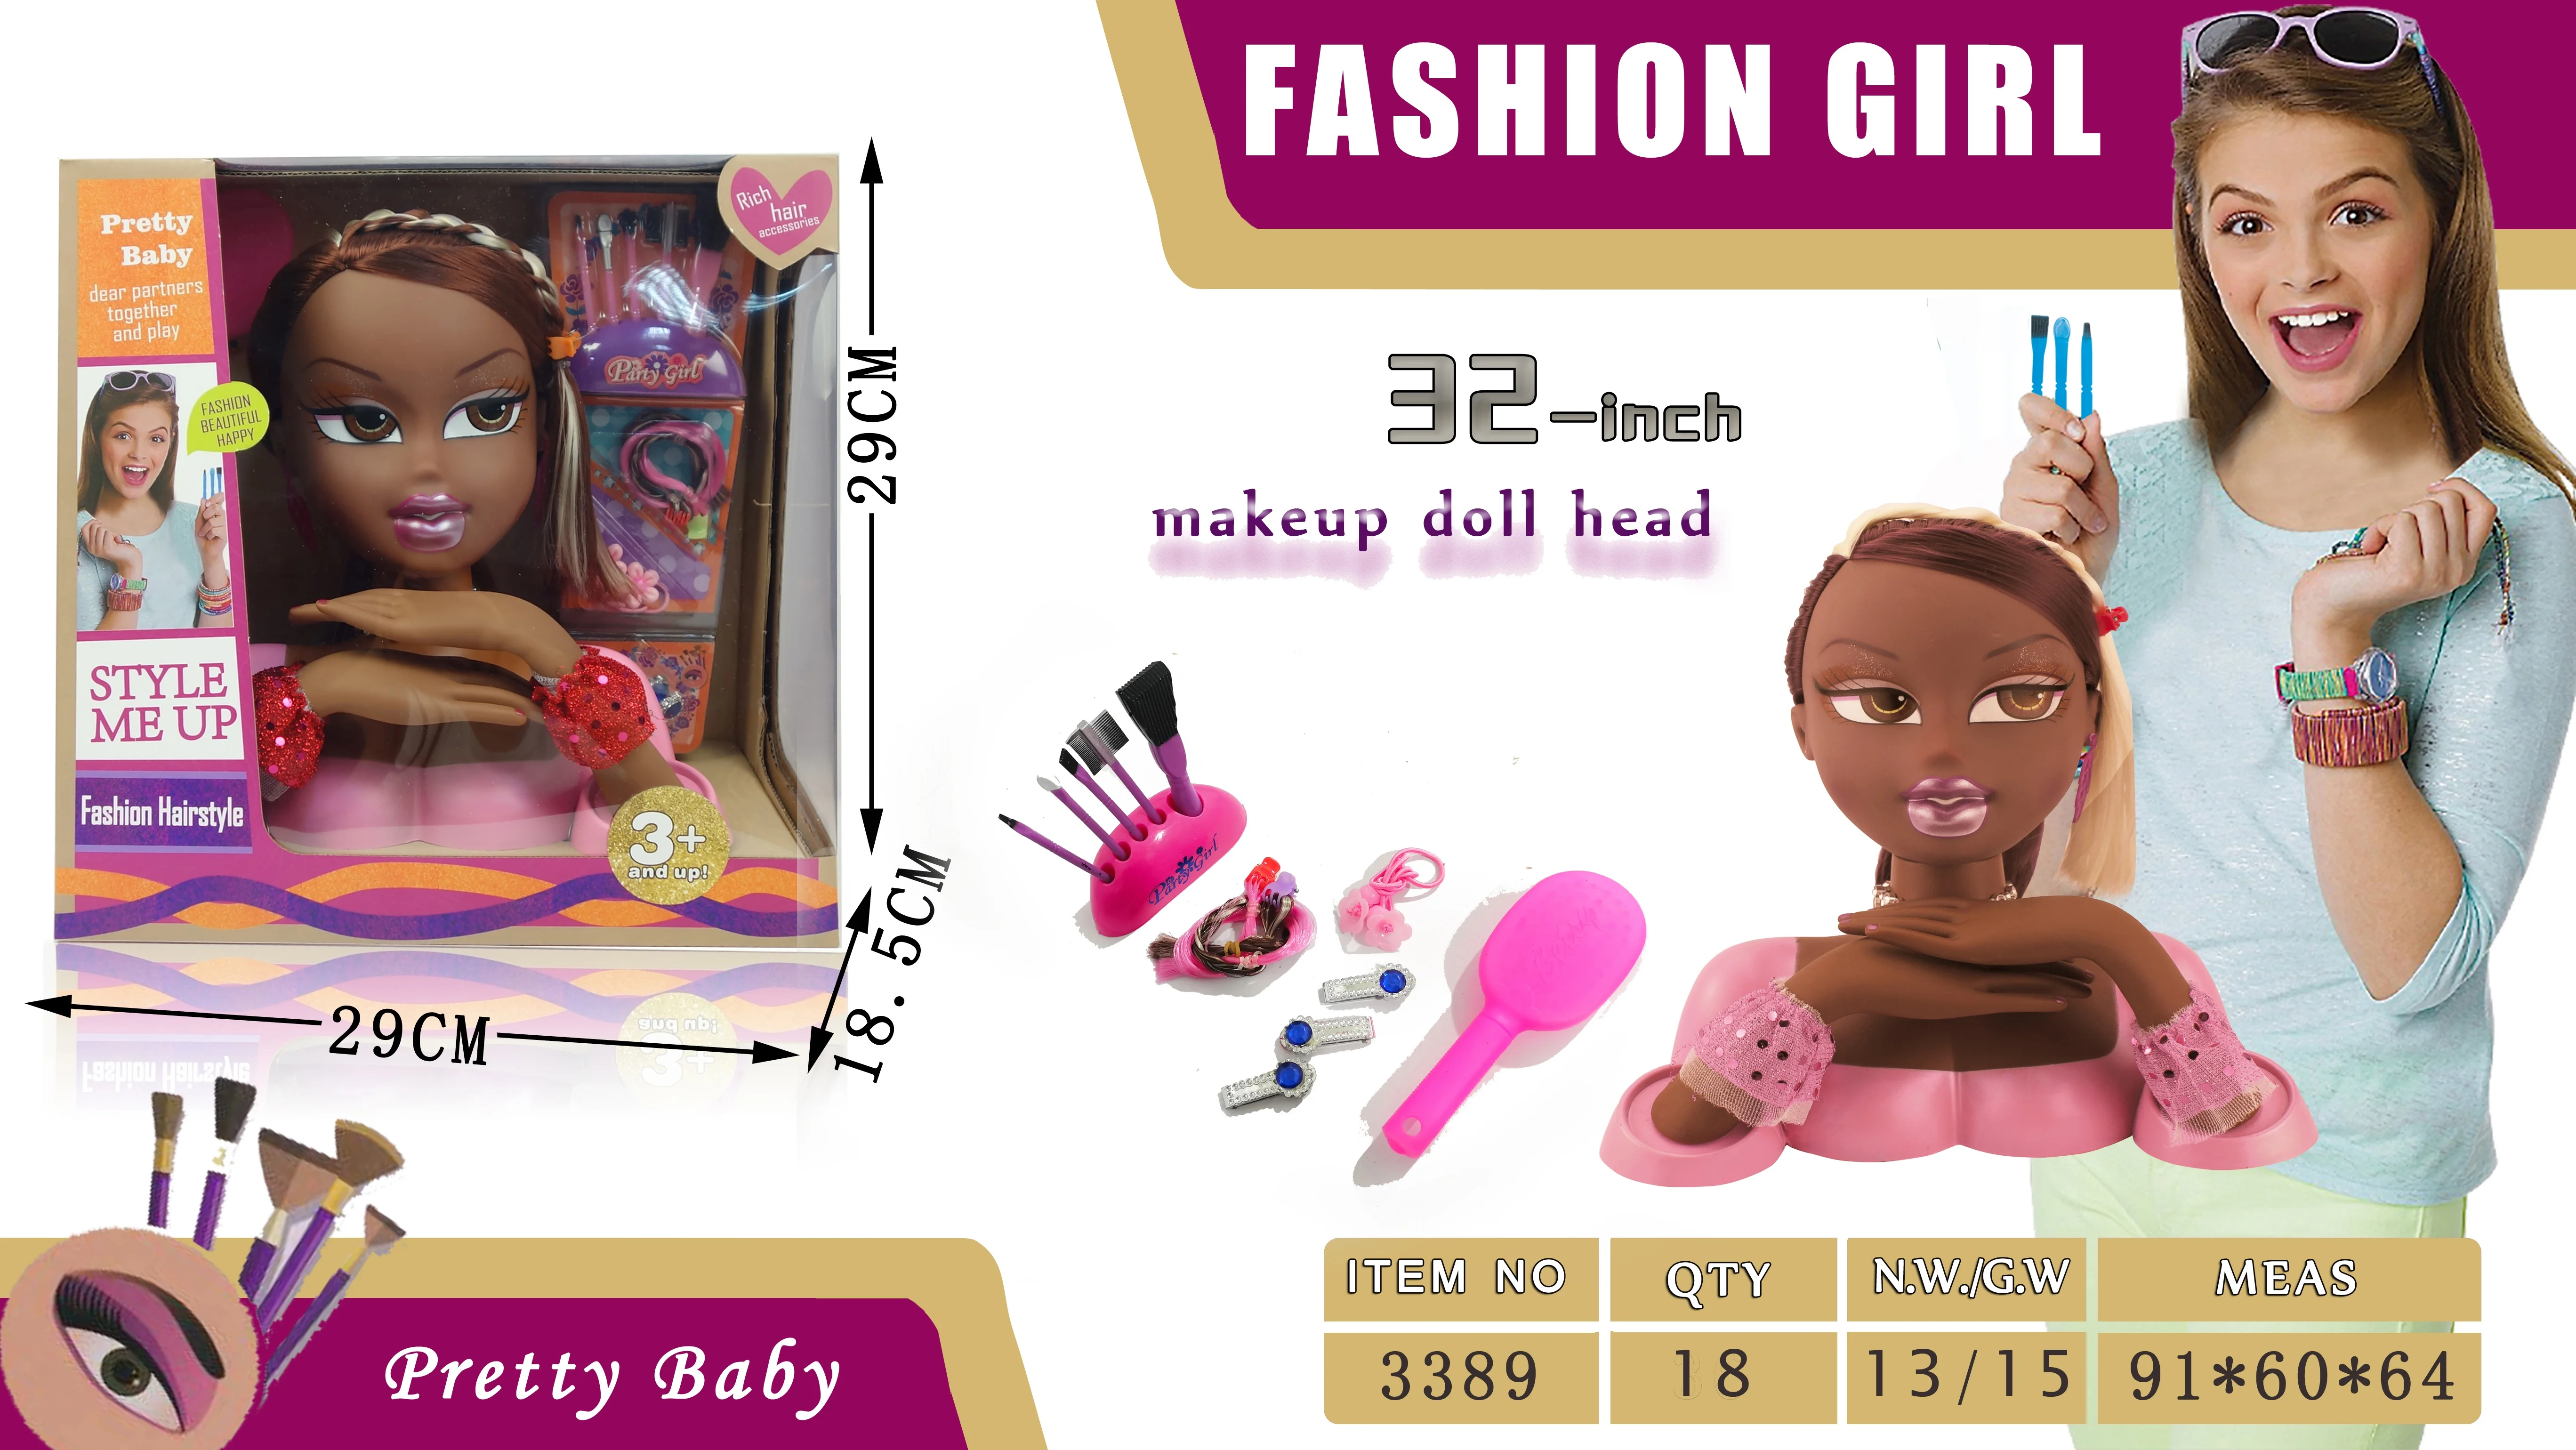 32 Inch Fashion Hairstyle Makeup Doll Head For Girls Play Toy Set Factory  Wholesale - Buy Kids Make Up Doll Head,Make Up Doll Head,Kids Make Up Toy